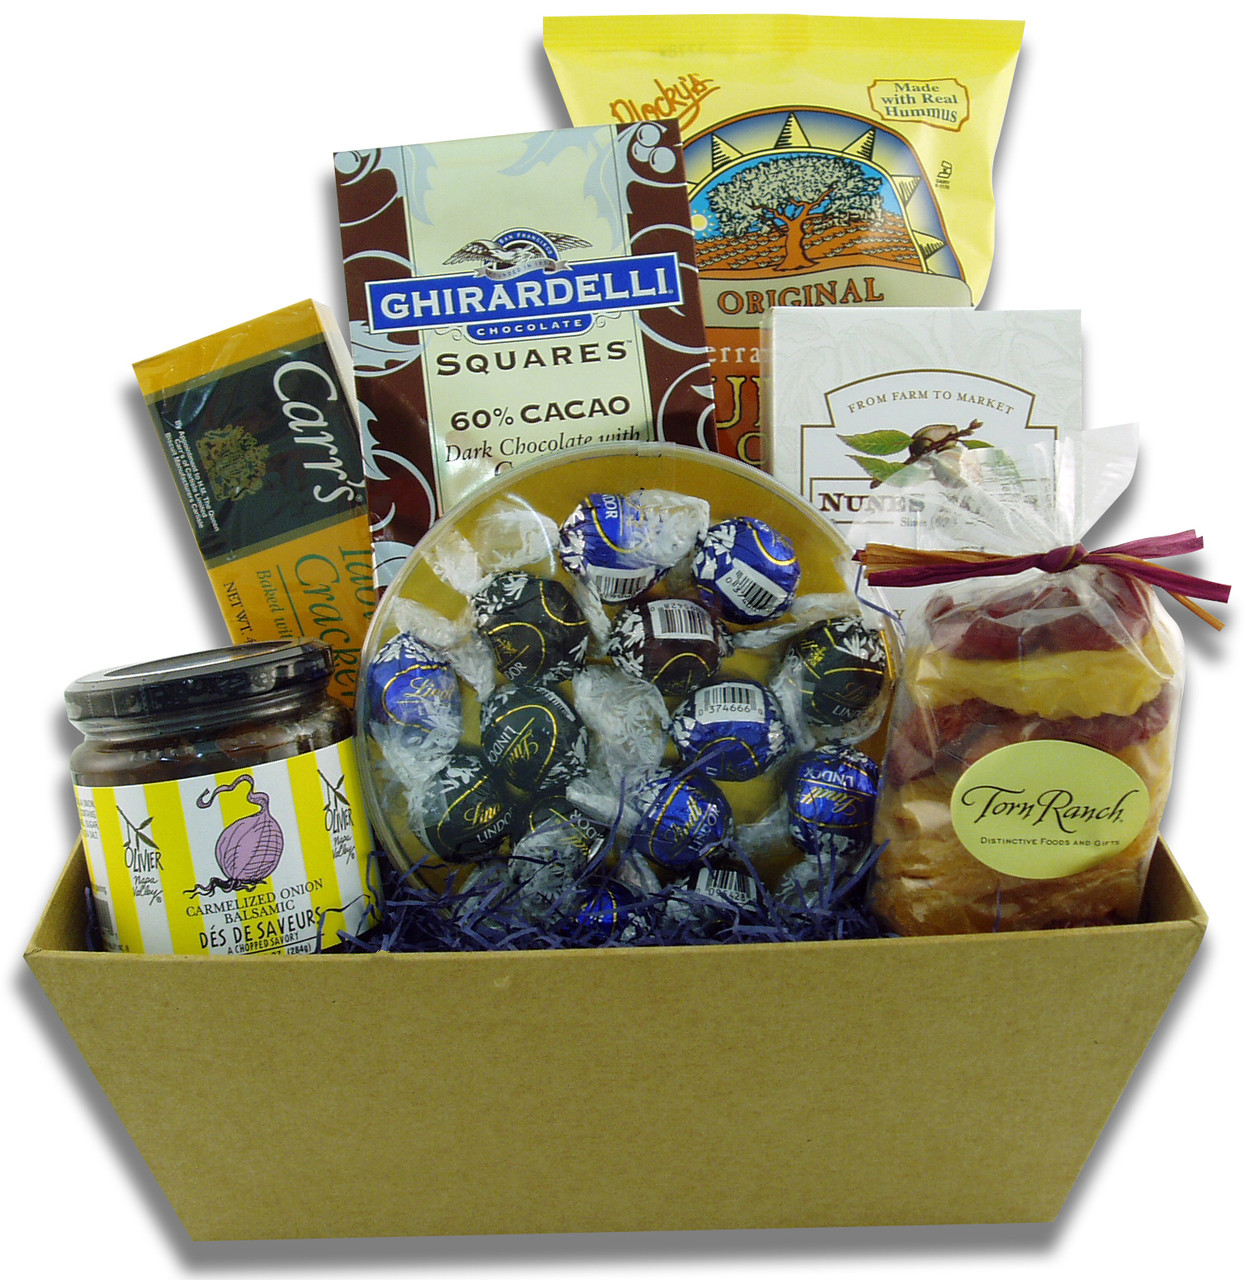 Gift basket arrangement filled with chocolates, crackers, and dips